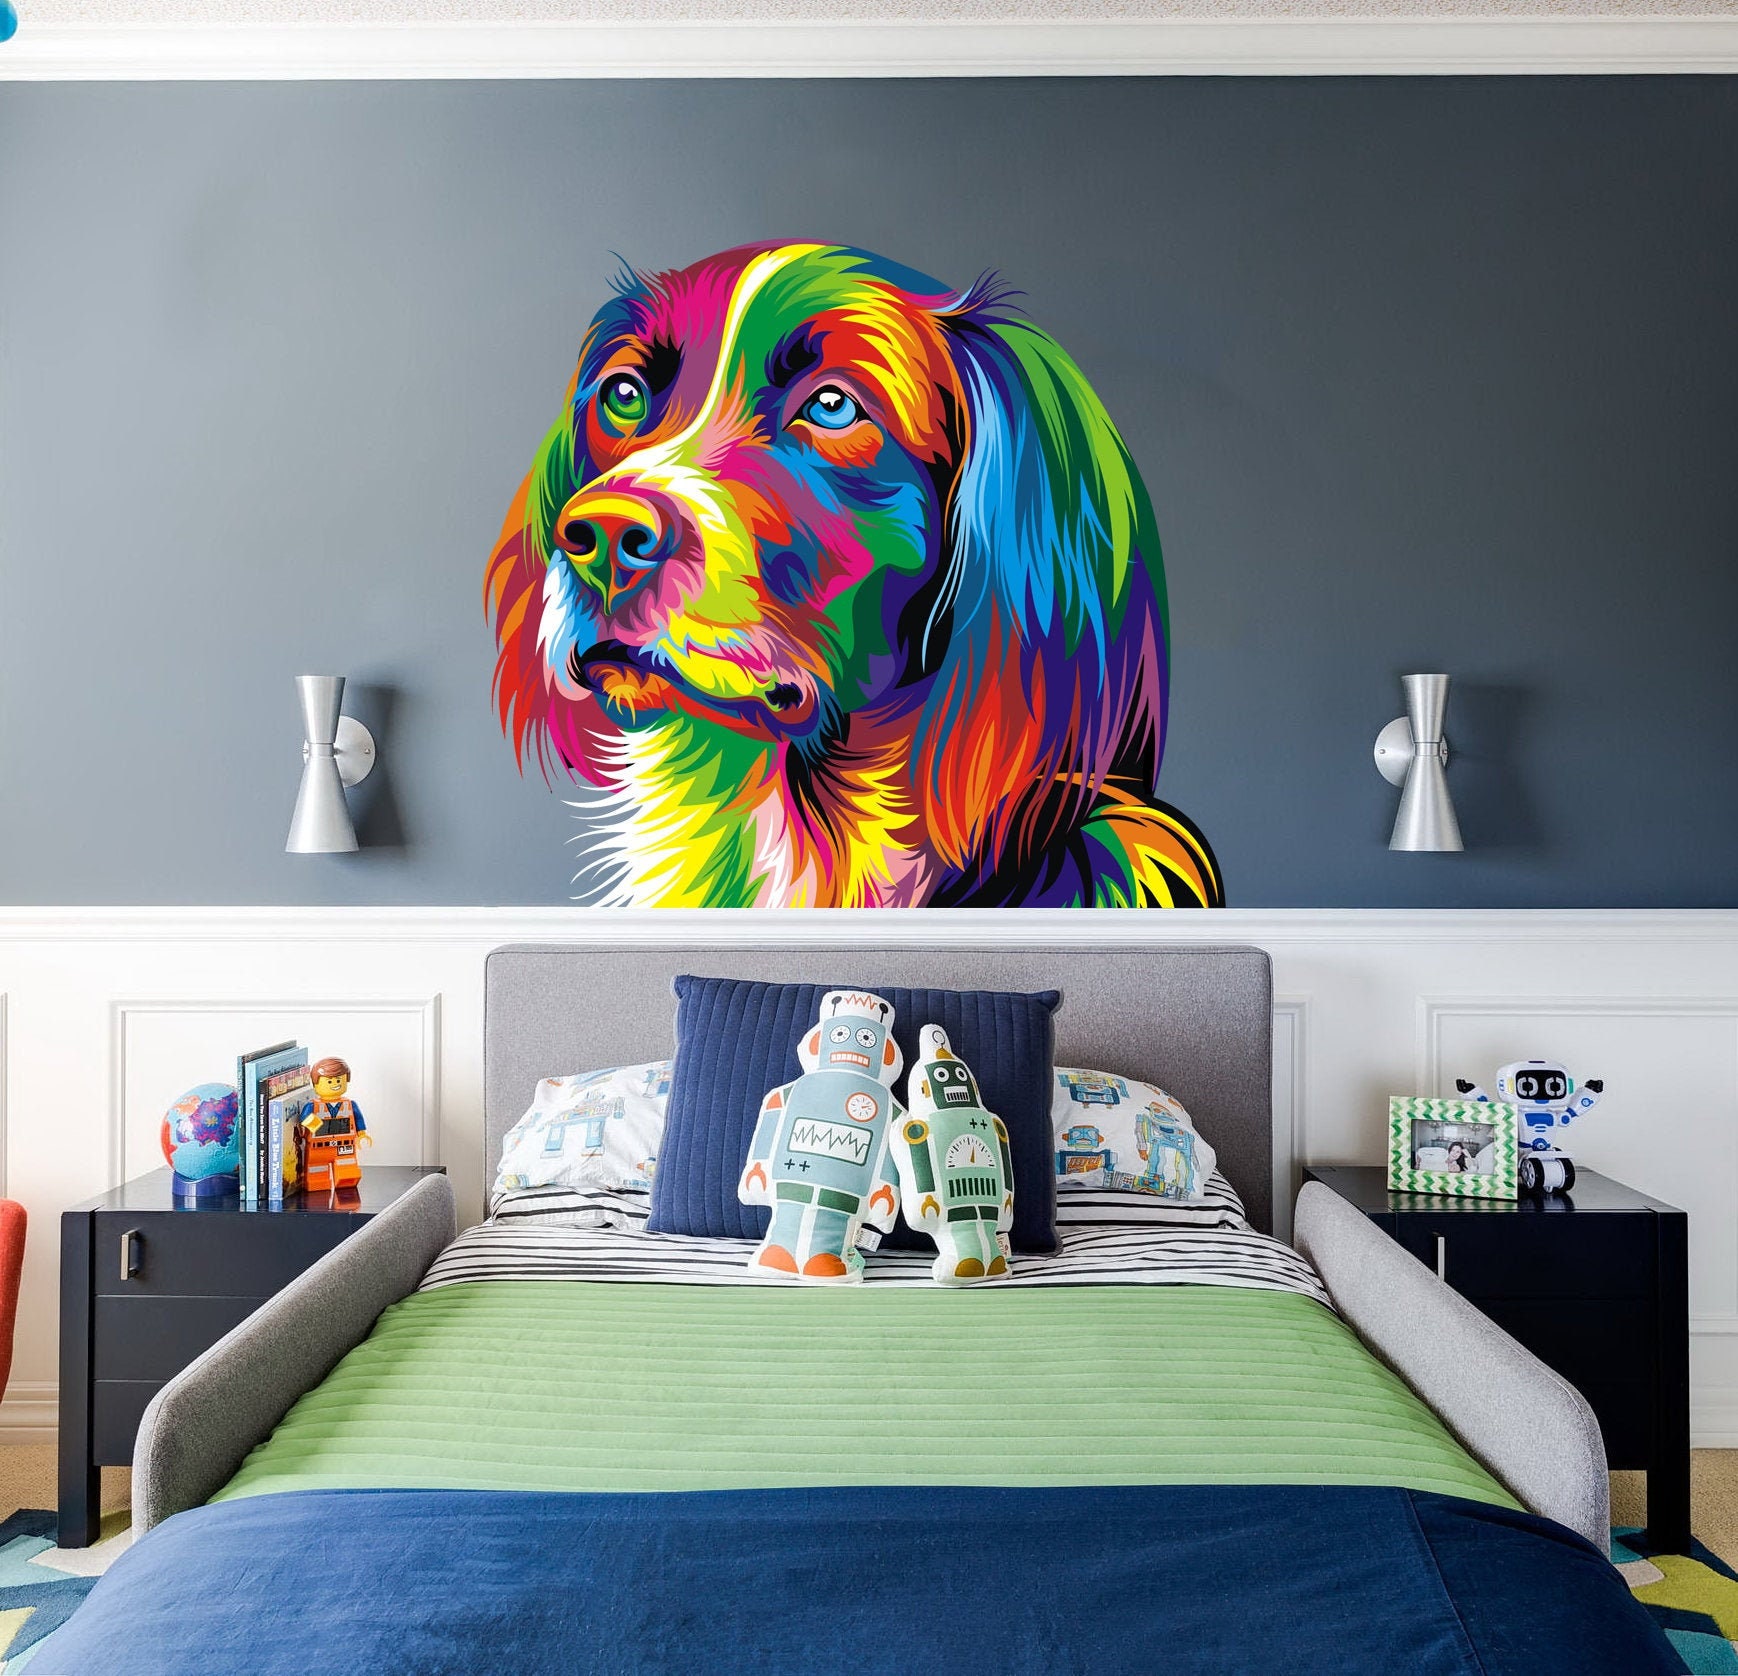 ROFARSO Lifelike Lovely Cute Dogs Animal 3D Vinyl Wall Stickers Removable Wall Decals Art Decorations Decor for Nursery Baby Bedroom Playroom Living Room Murals 